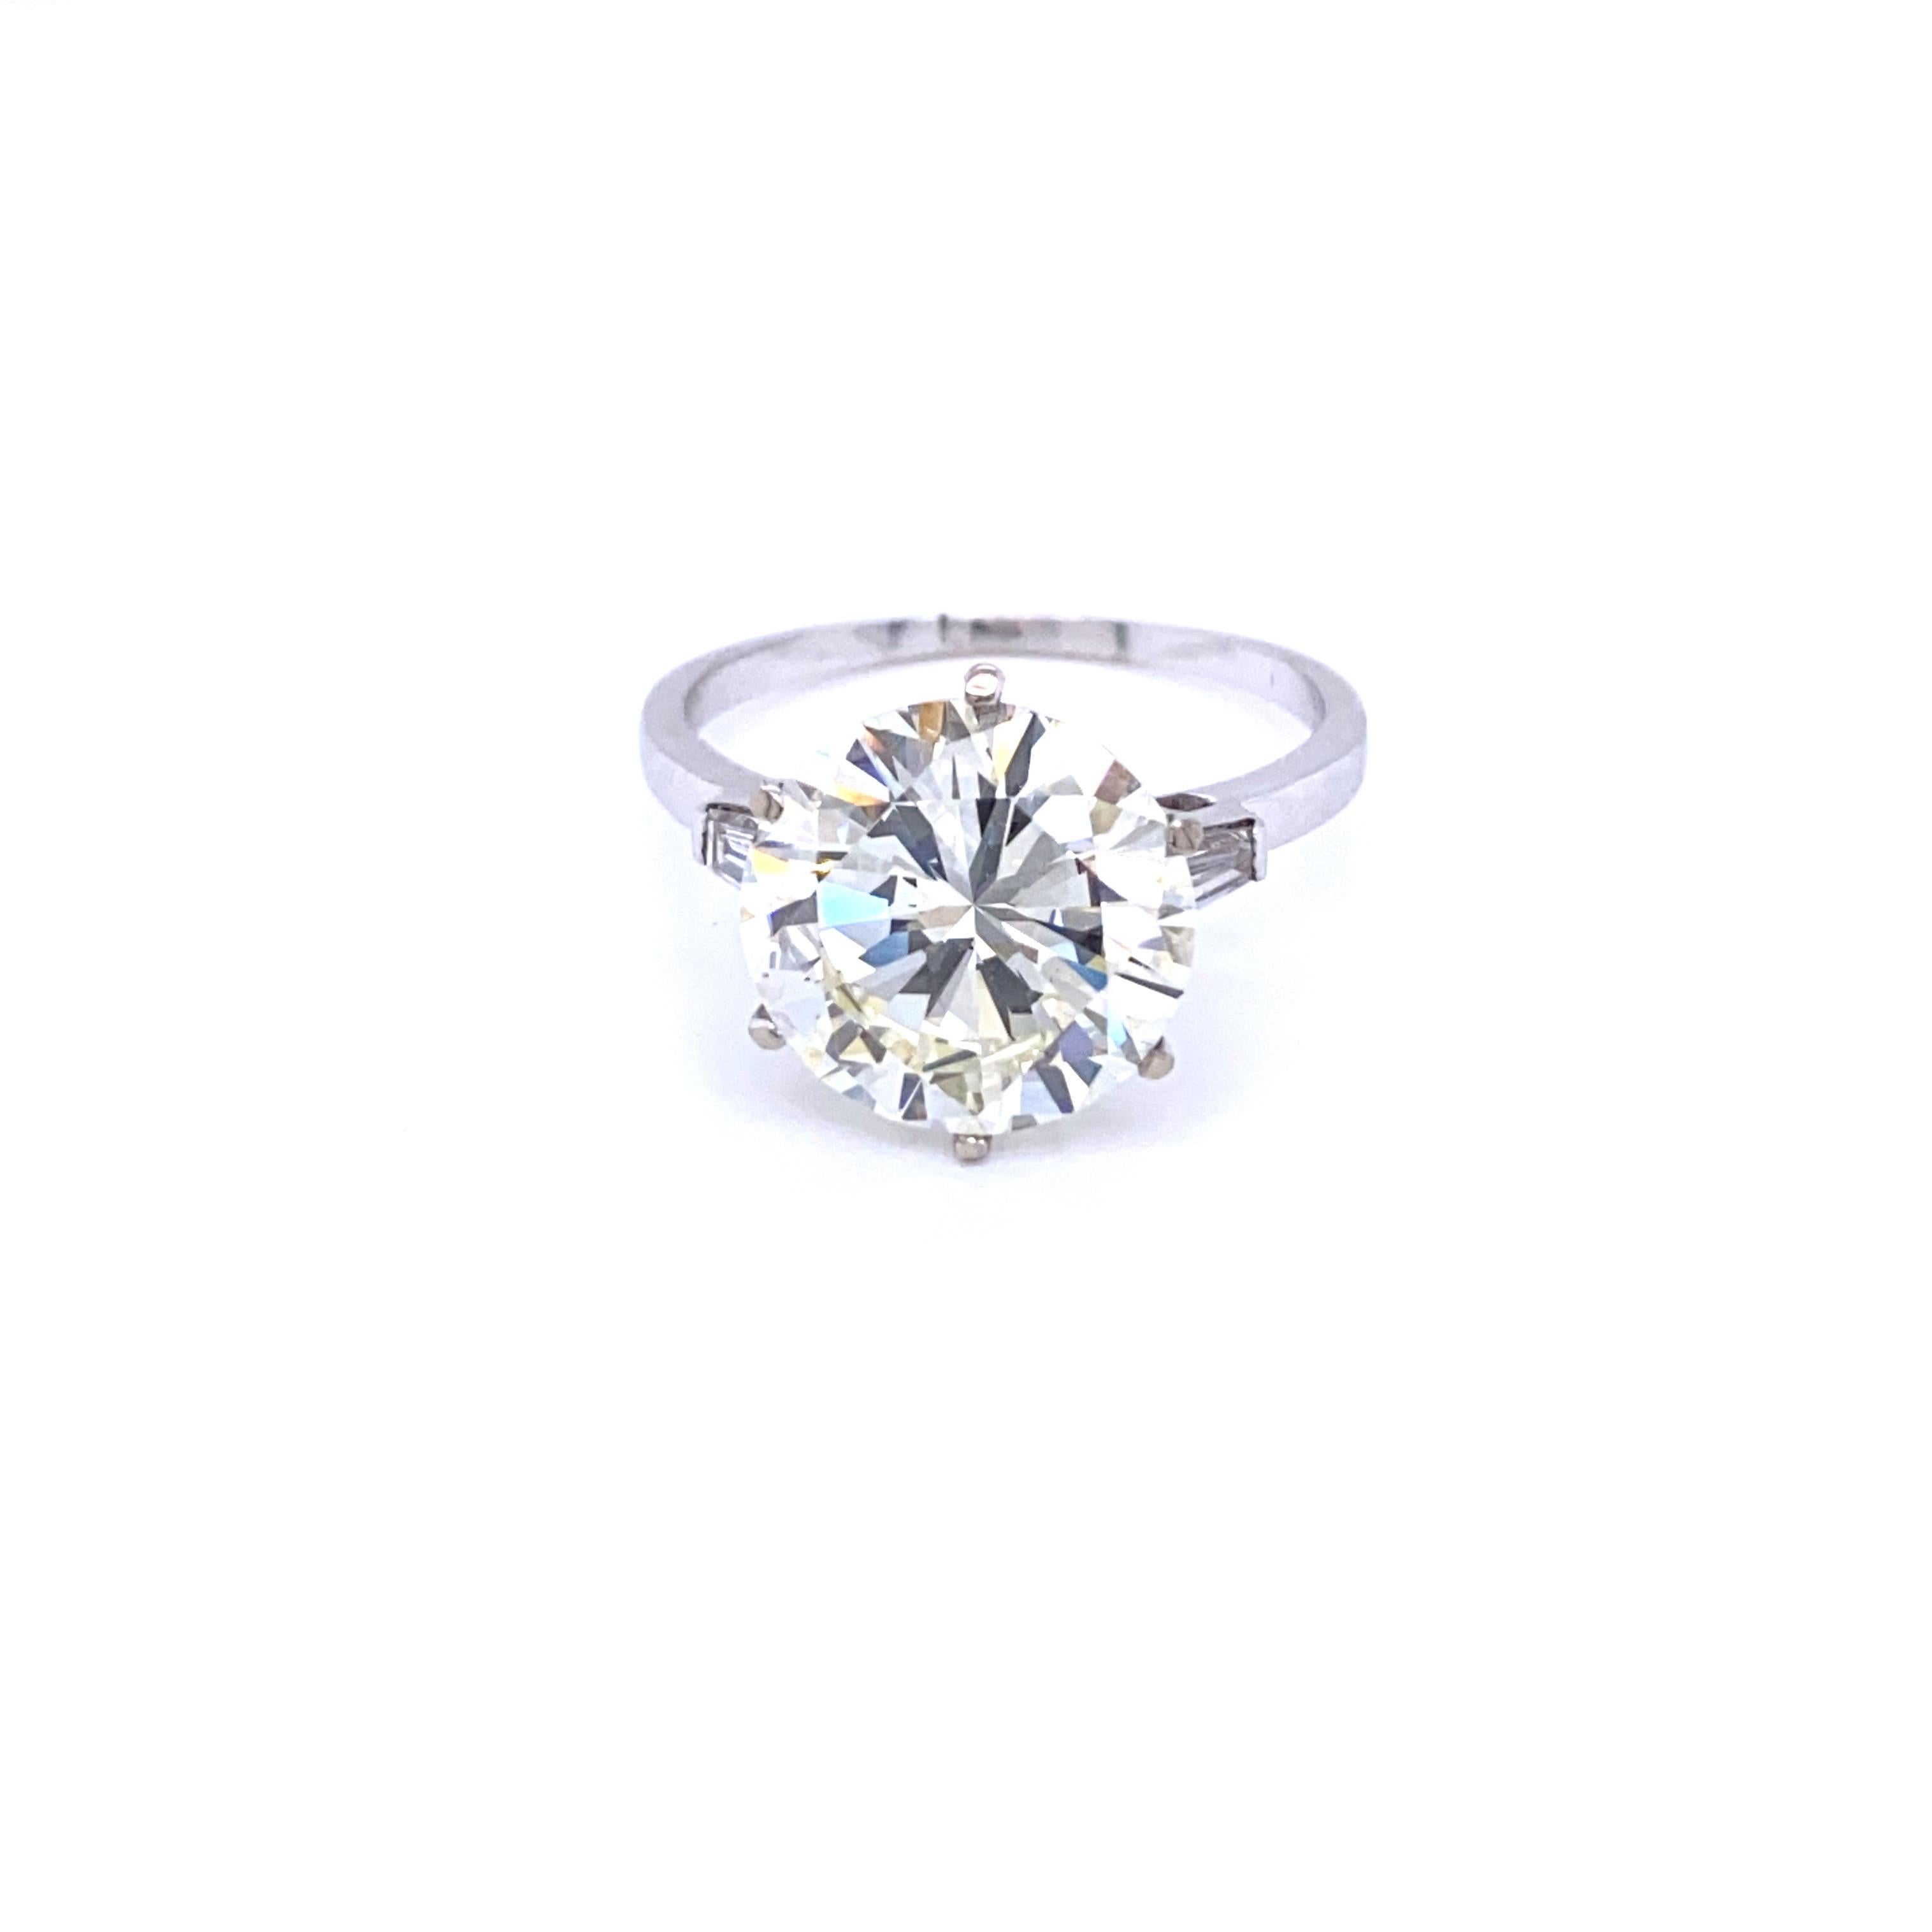 An exceptional estate engagement ring set in 18k white Gold, featuring a large 5.87 ct Round brilliant-cut Diamond, graded M Color Vvs2 clarity, Very Good proportions and faint fluorescence, surrounded by 0,30 carats of baguette cut diamonds.

The